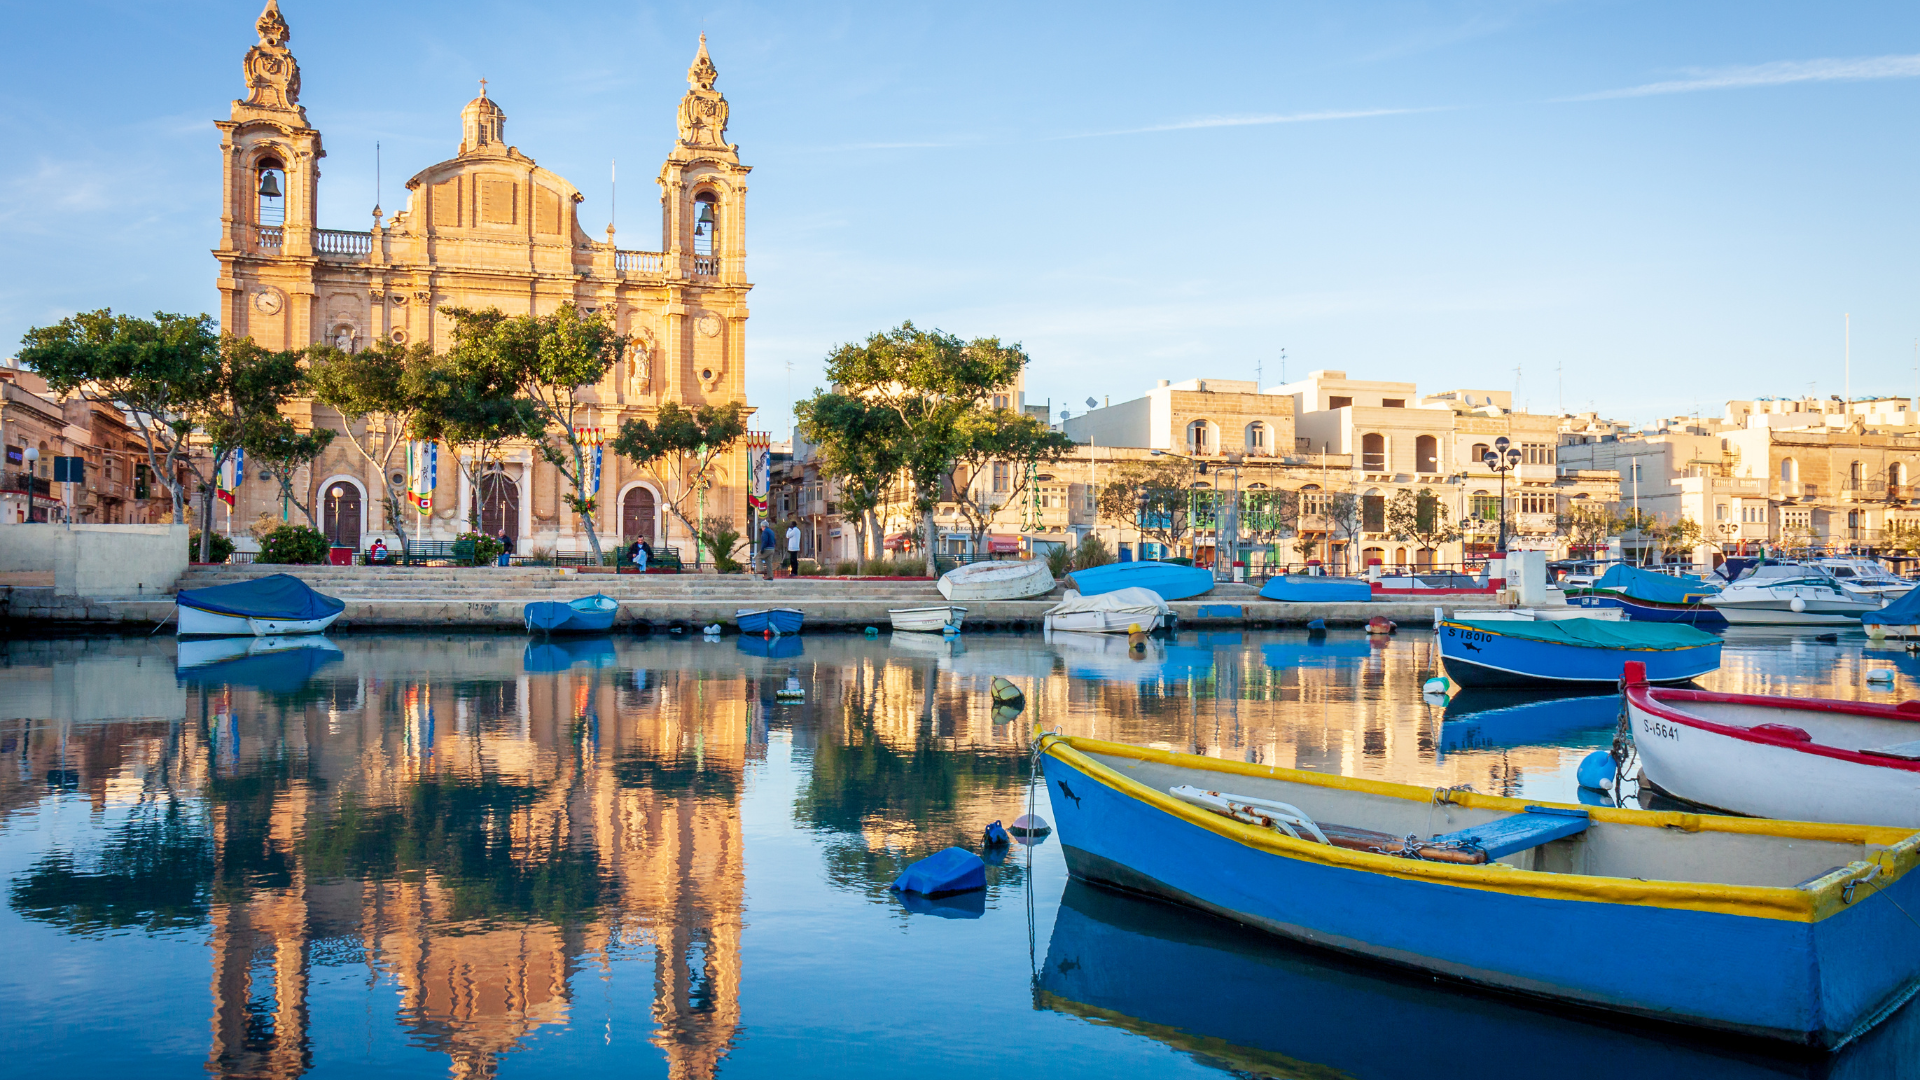 Valletta, Malta is one of the most walkable cities in the world